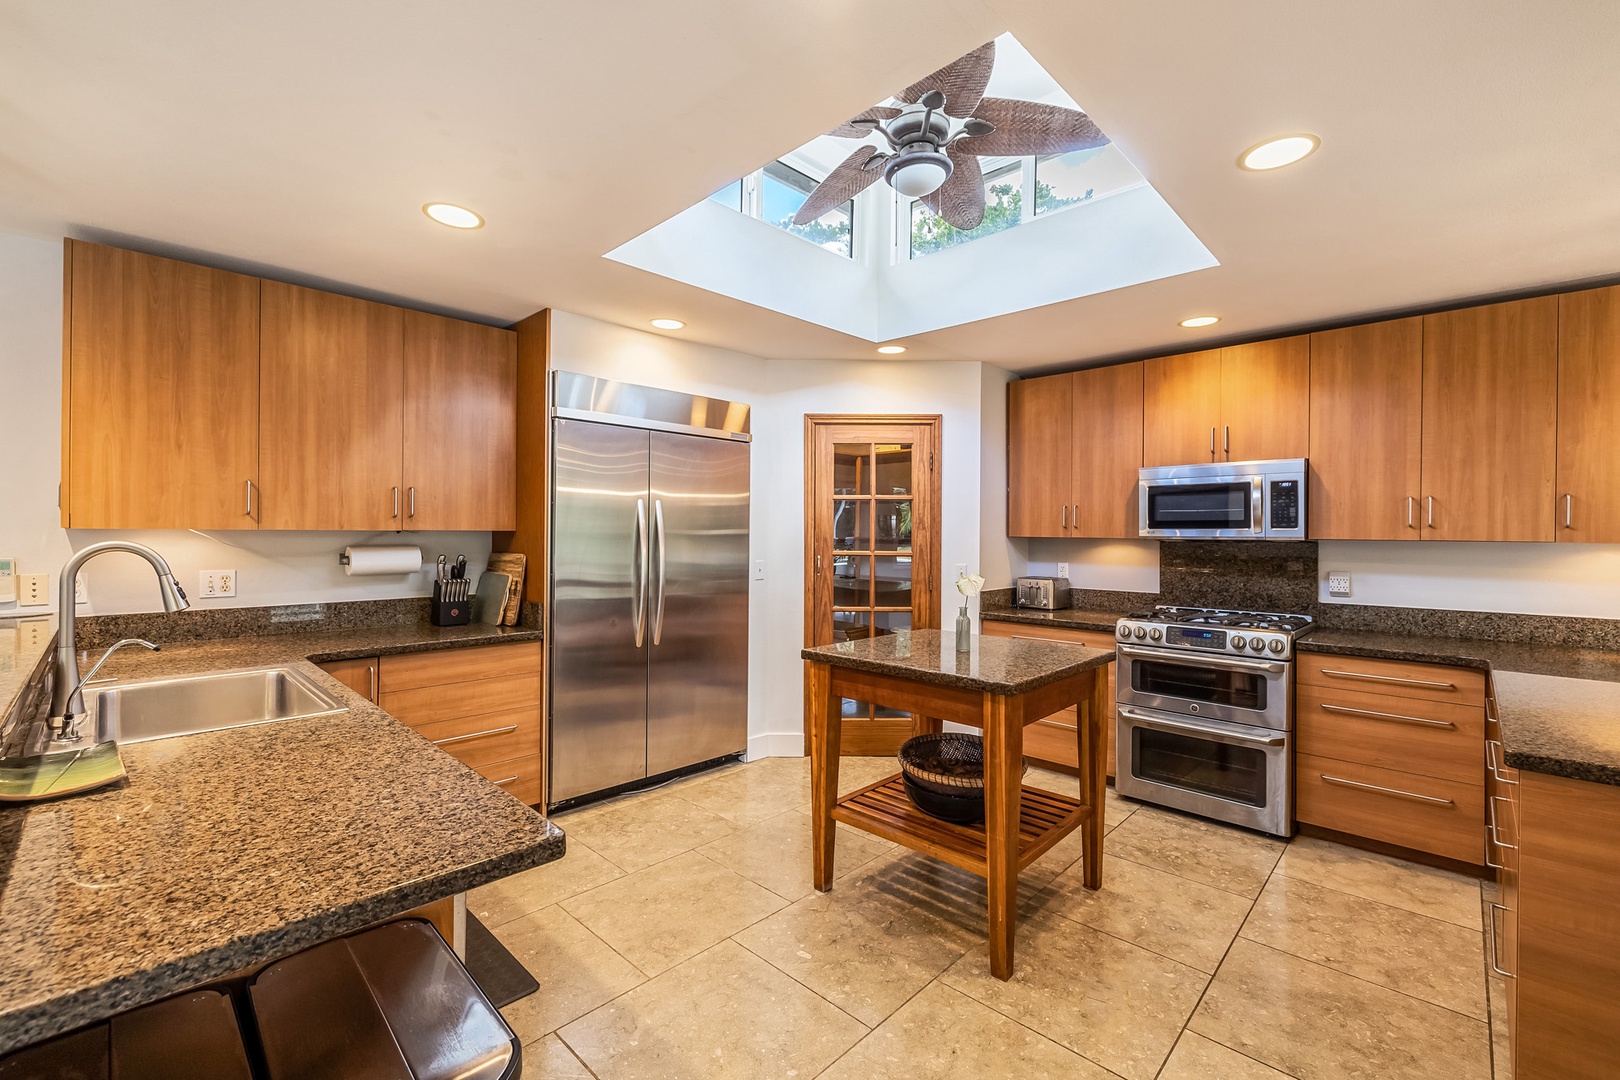 Honolulu Vacation Rentals, Hale Ho'omaha - The kitchen is equipped with stainless steel appliances